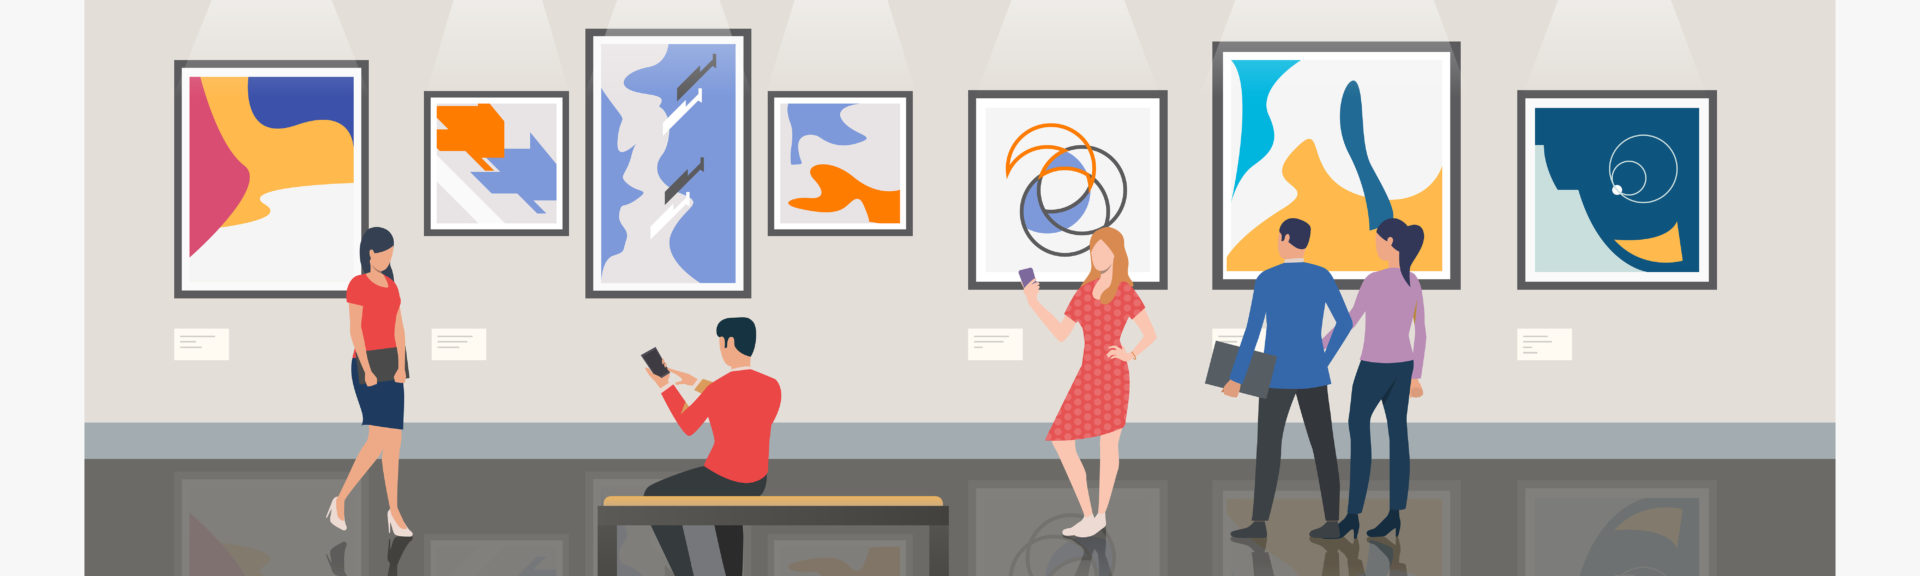 Men and women visiting museum or art gallery vector illustration